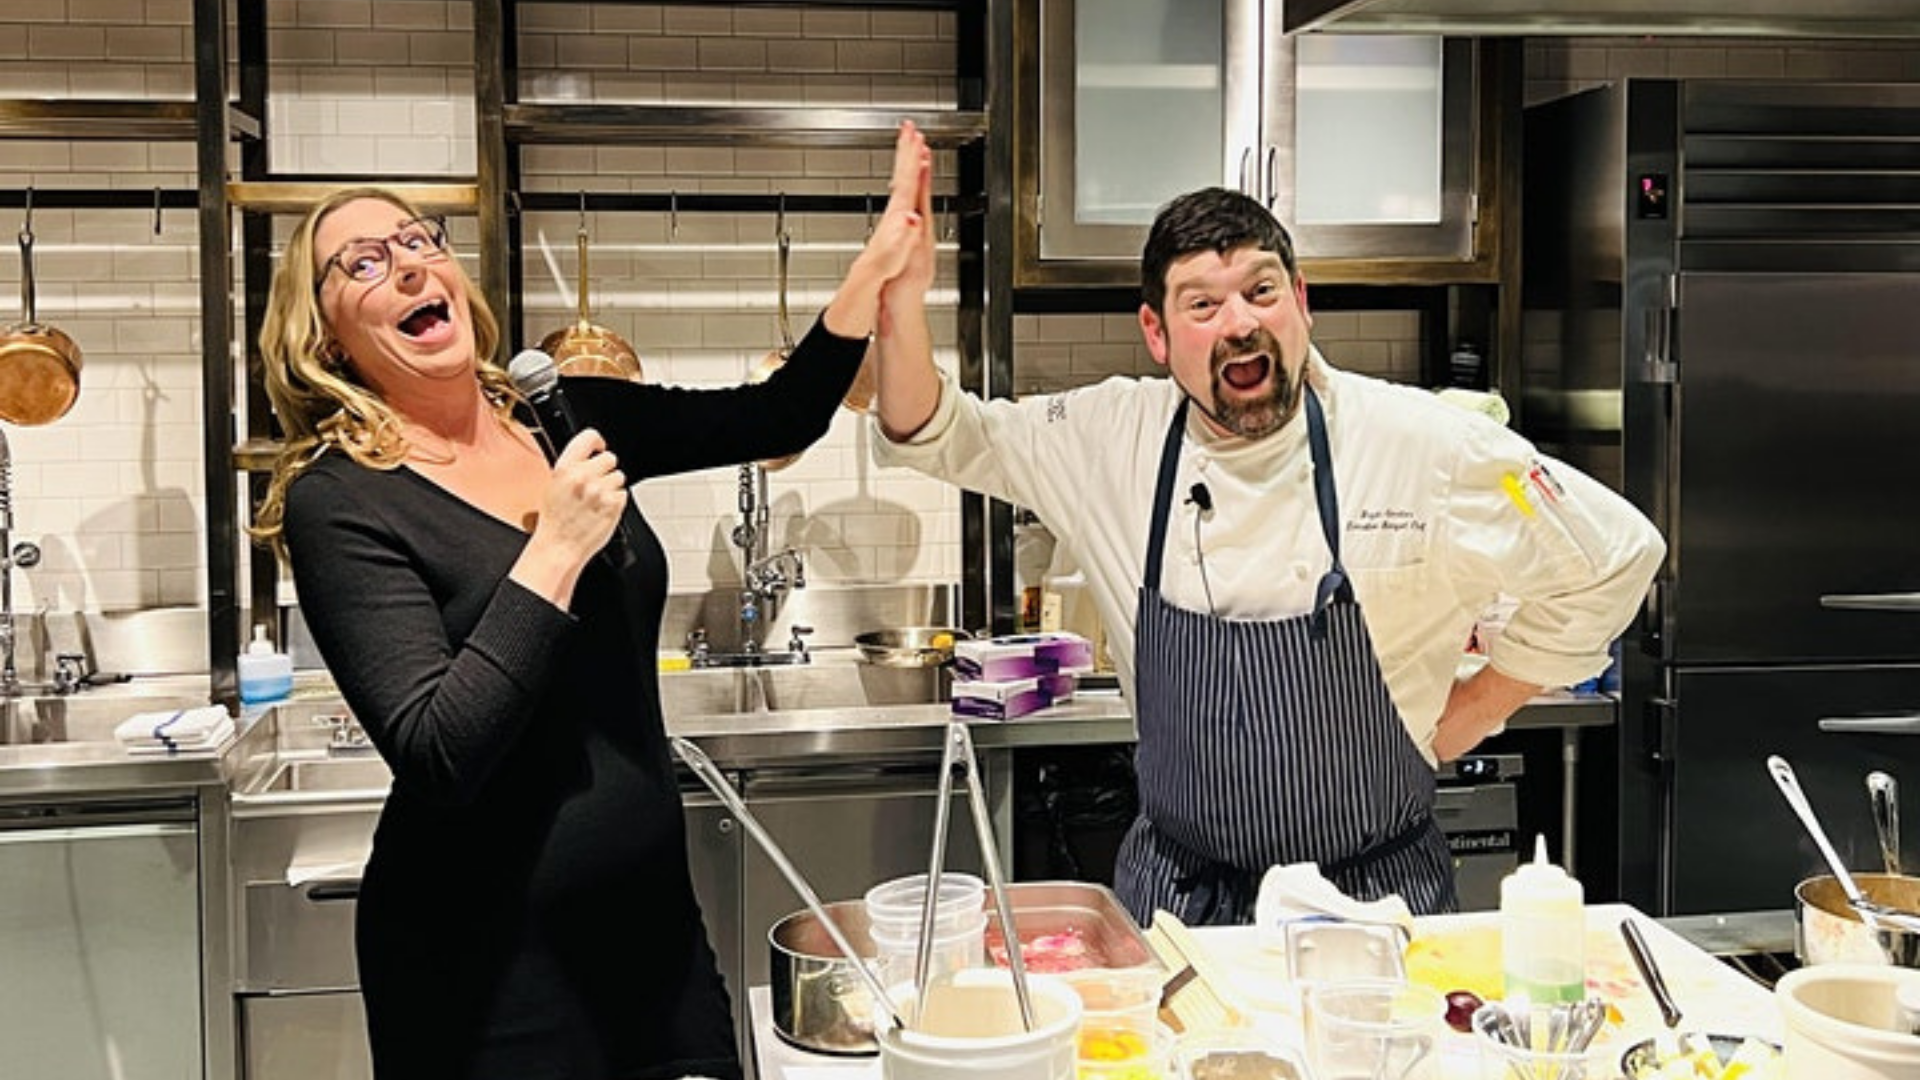 Comedian and chef laughing in the kitchen